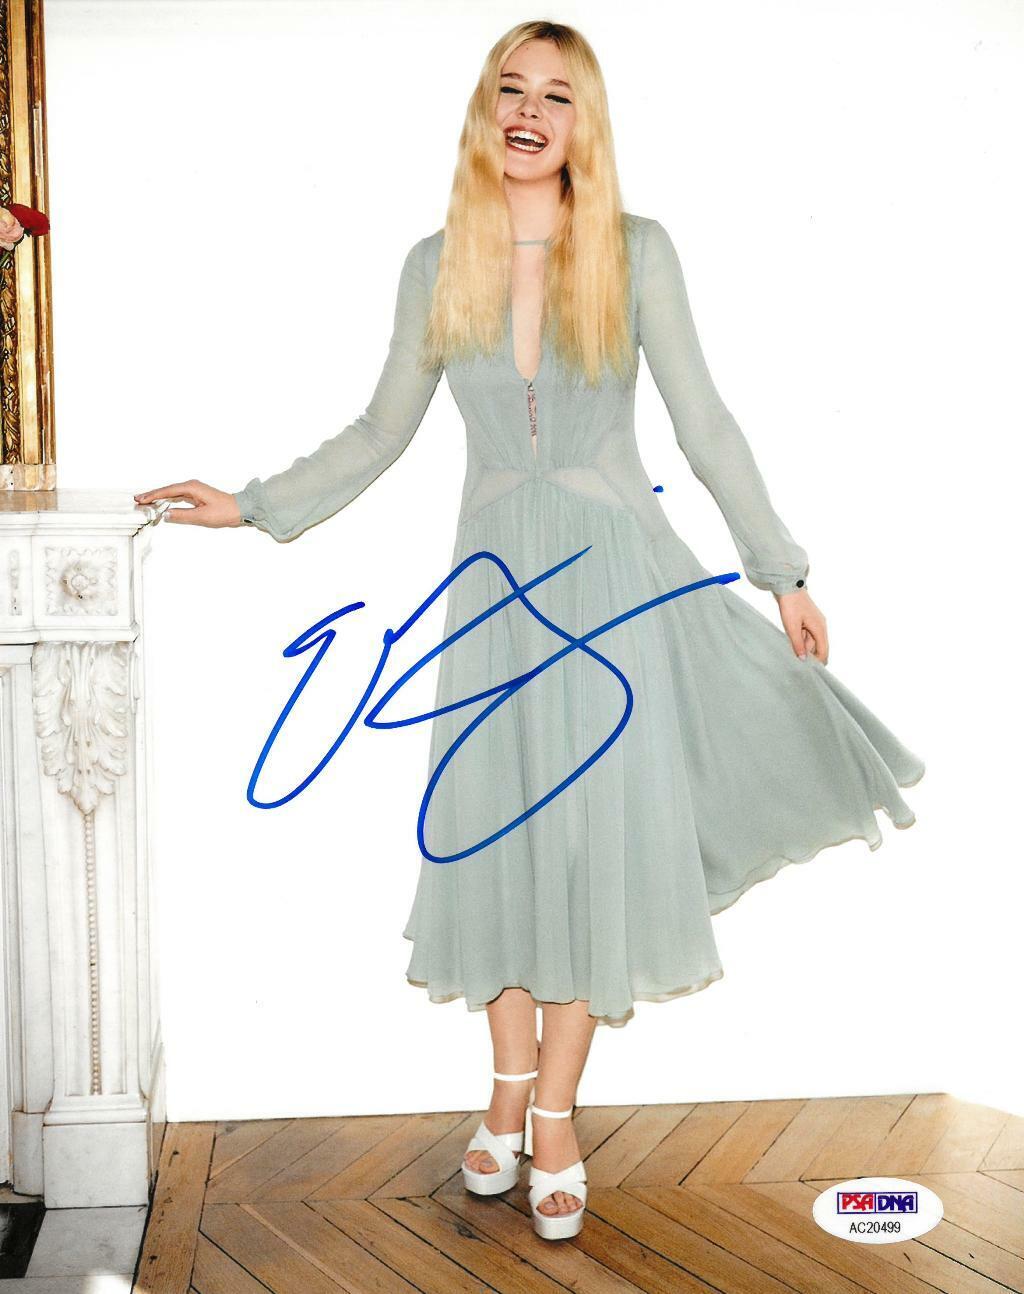 Elle Fanning Signed Authentic Autographed 8x10 Photo Poster painting PSA/DNA #AC20499